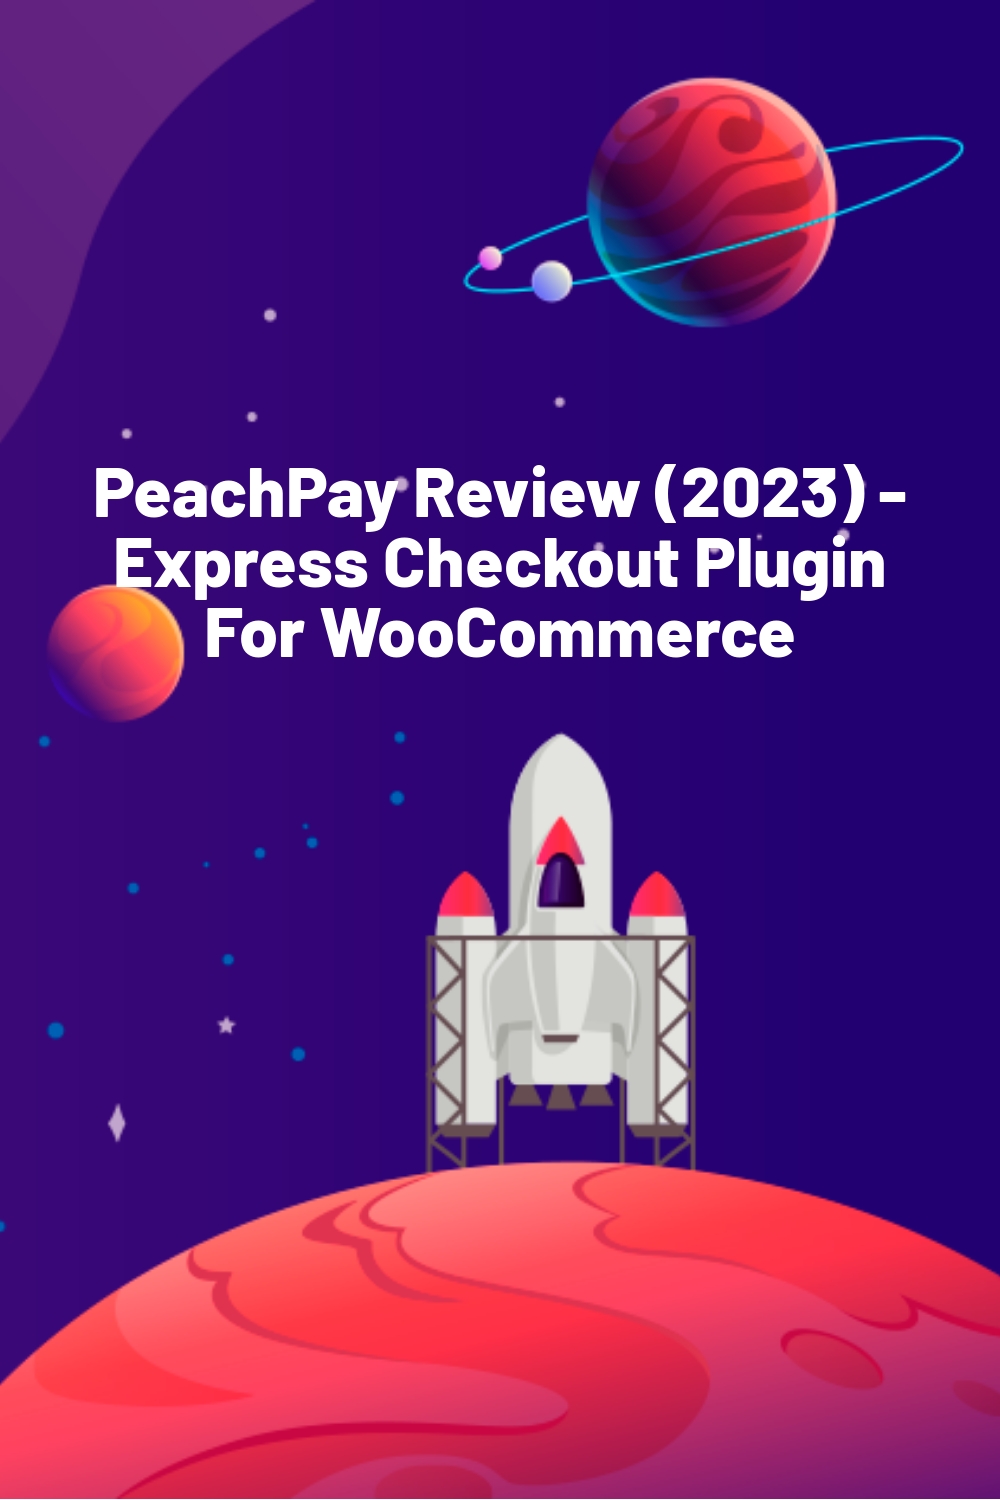 PeachPay Review (2023) – Express Checkout Plugin For WooCommerce